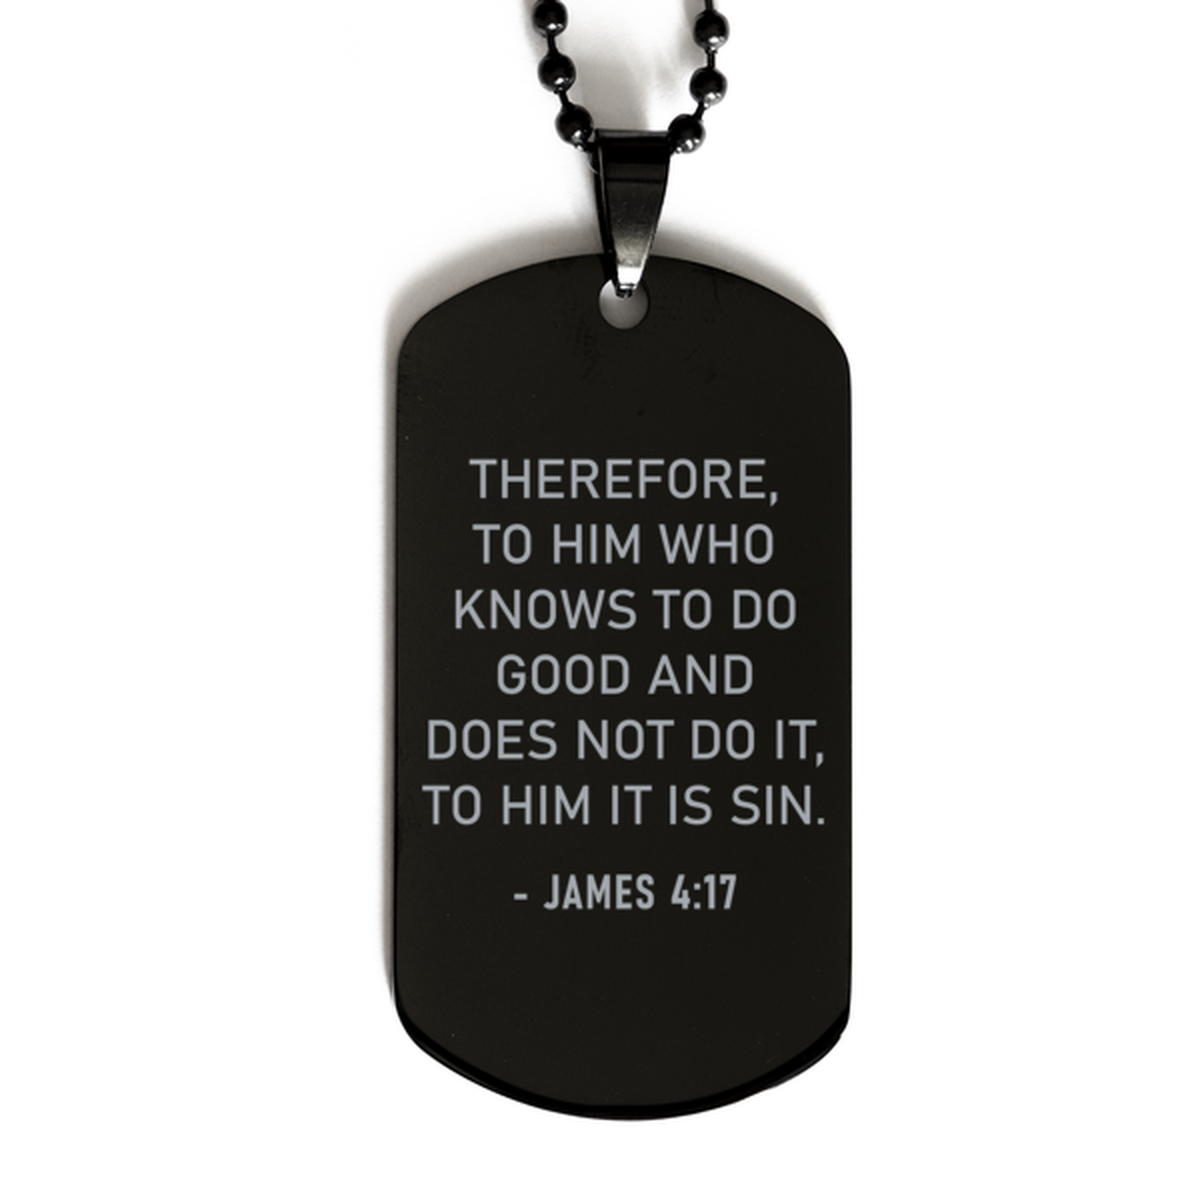 Bible Verse Black Dog Tag, James 4:17 Therefore, To Him Who Knows To Do Good And Does, Christian Inspirational Necklace Gifts For Men Women